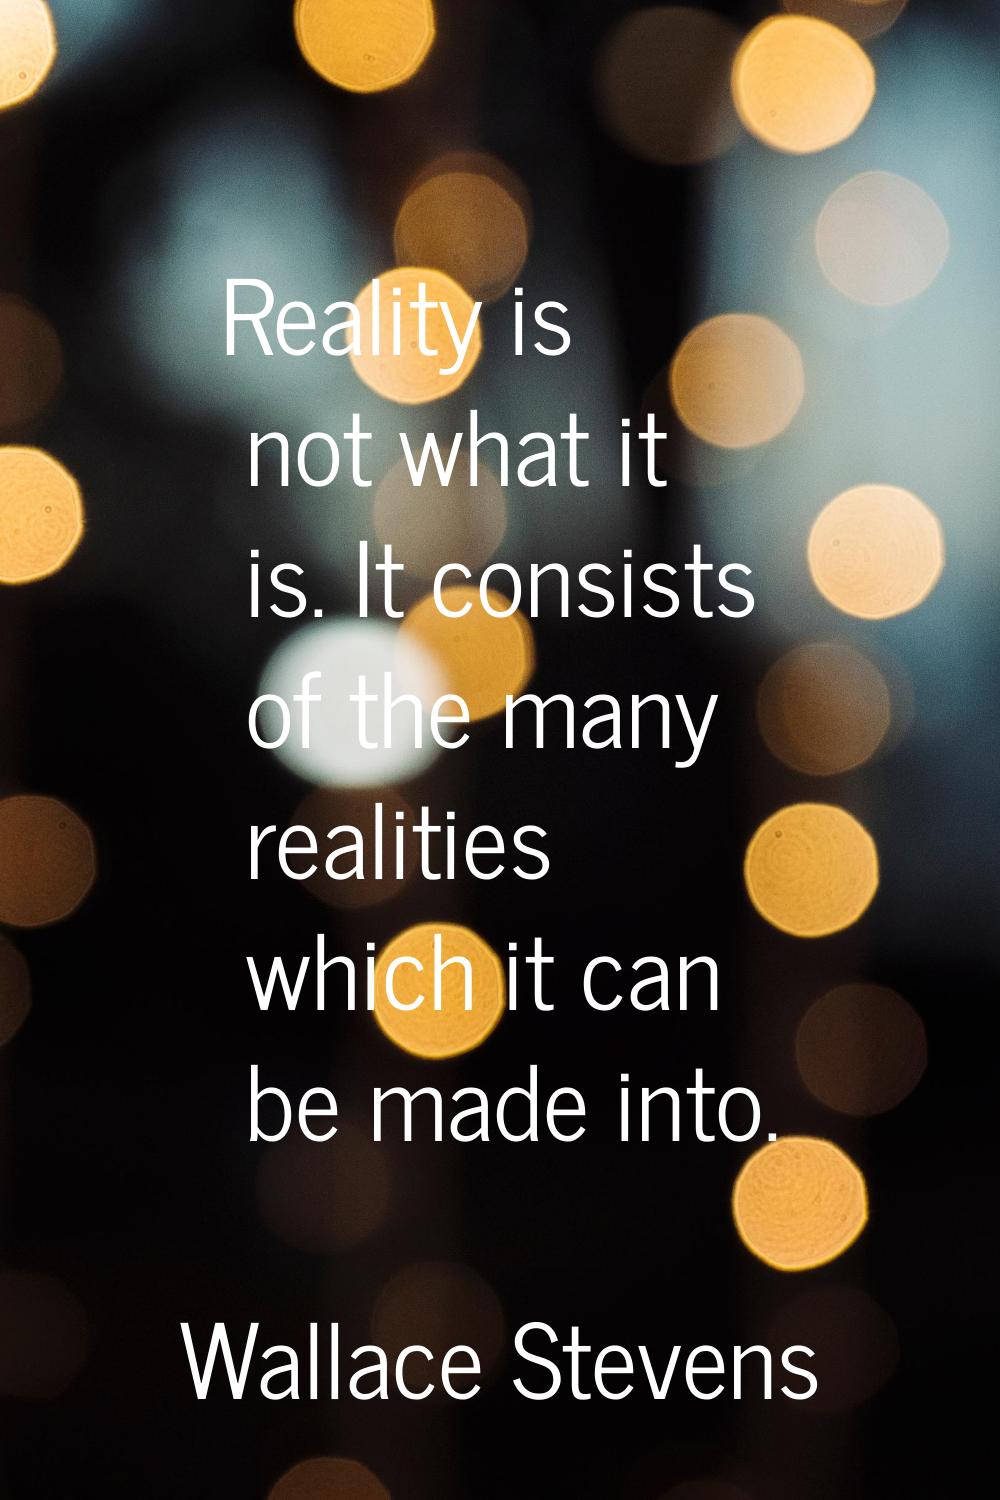 Reality is not what it is. It consists of the many realities which it can be made into.